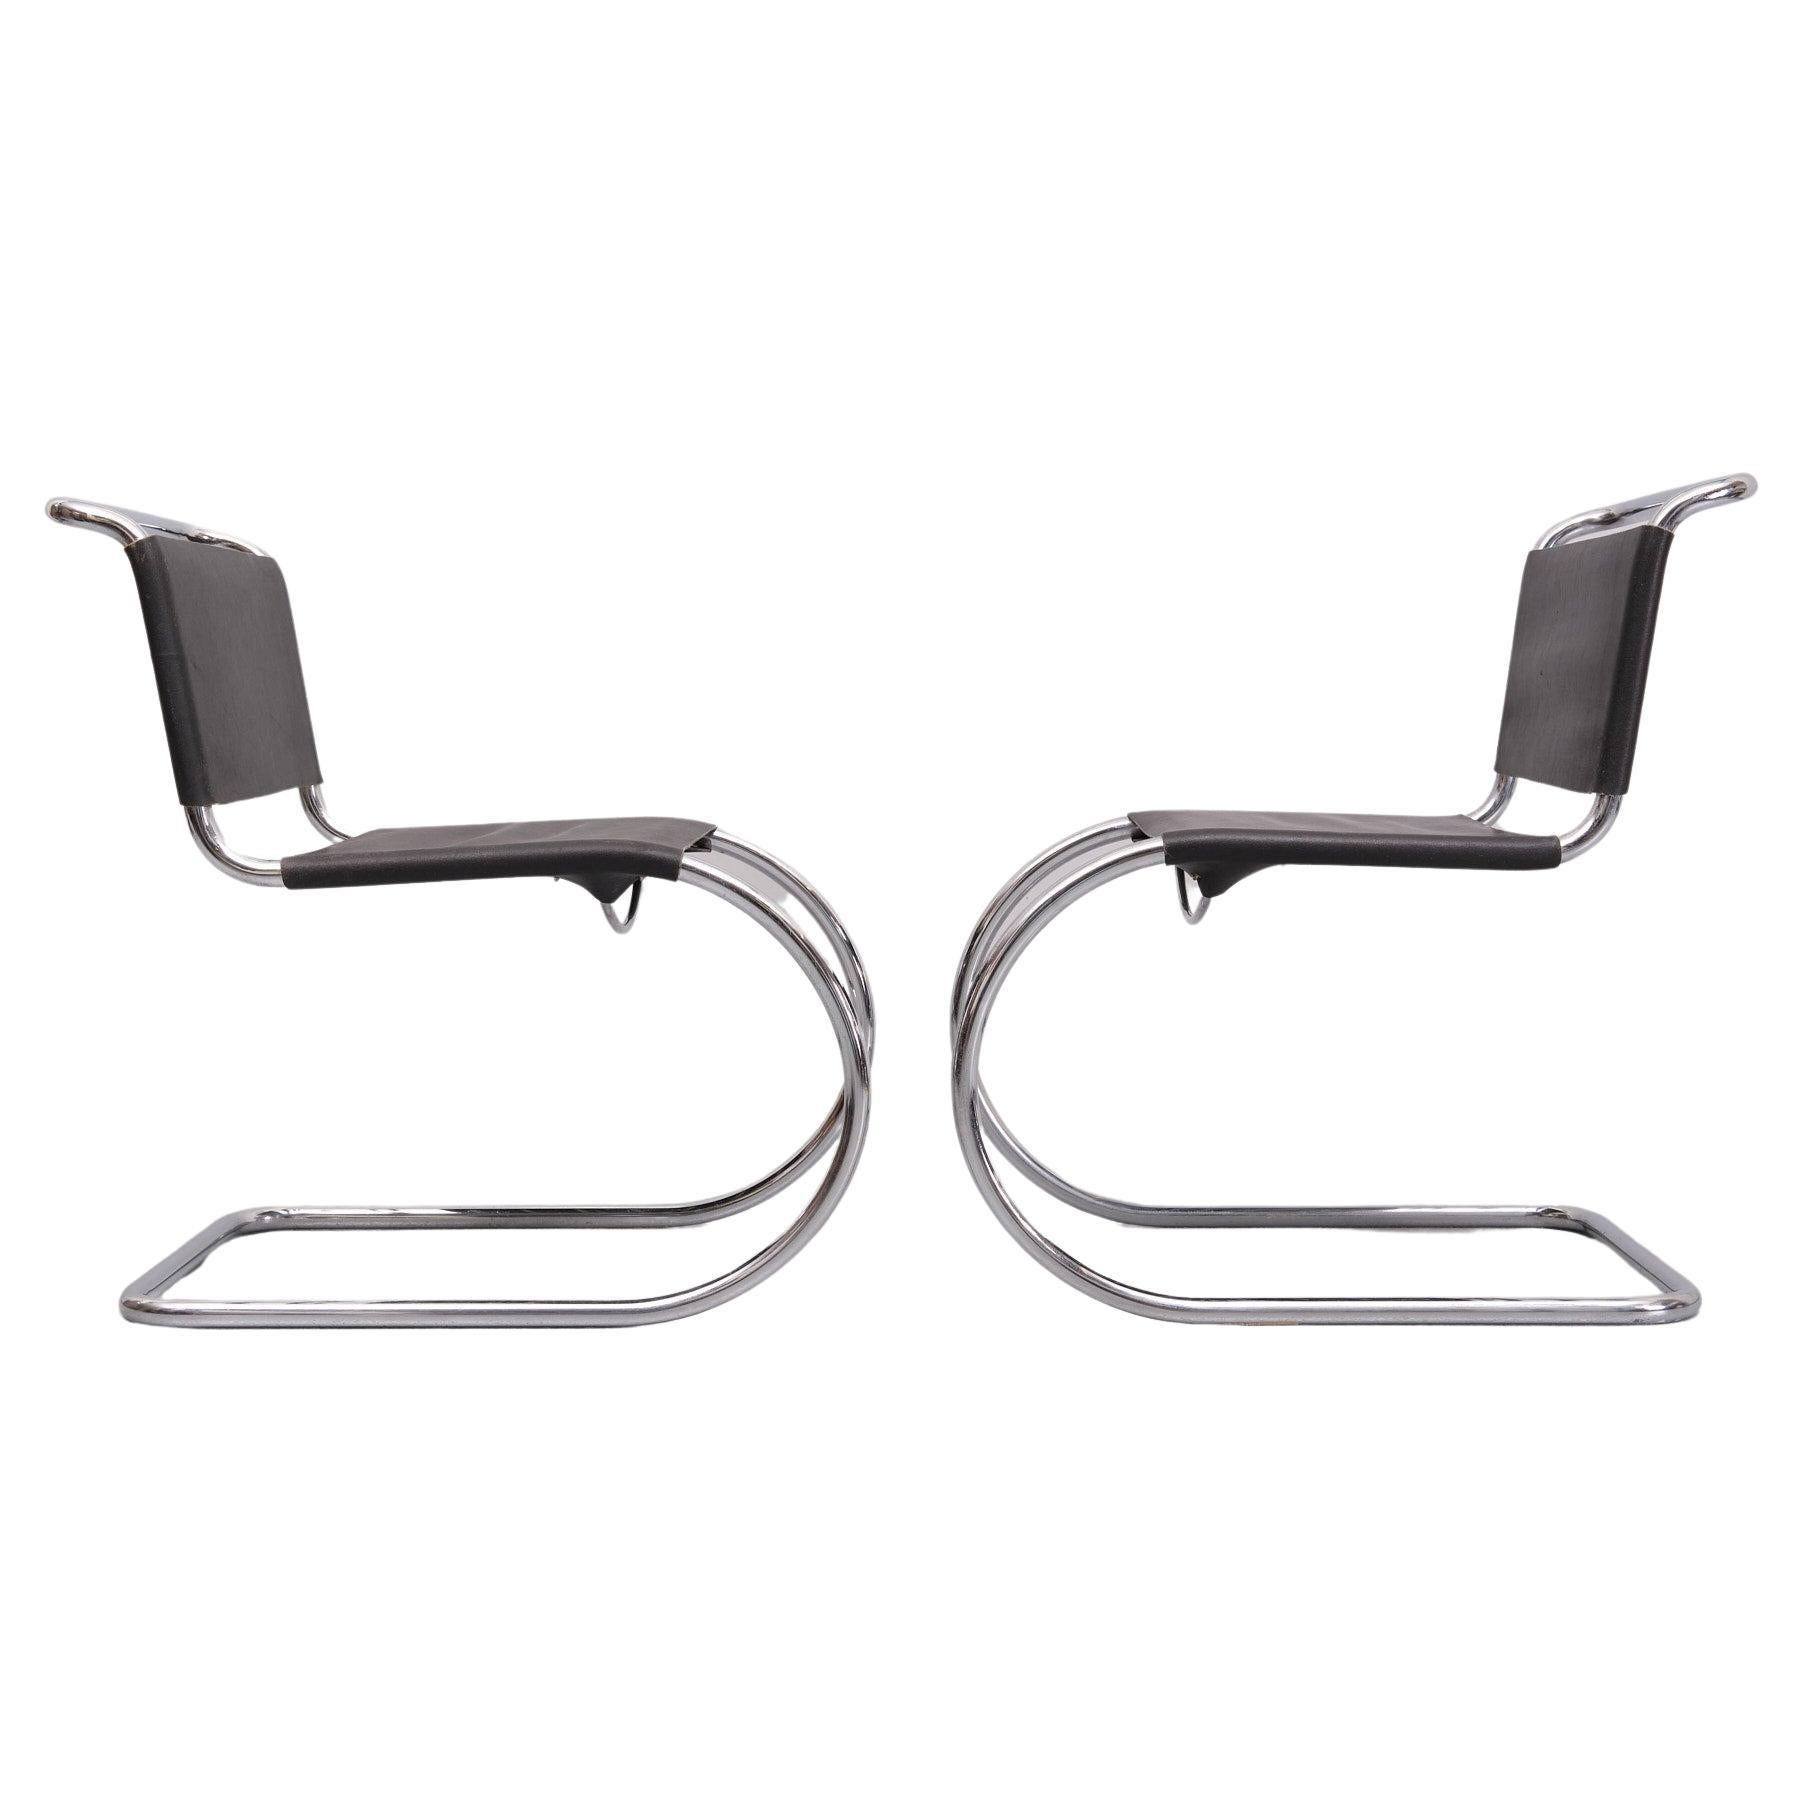 Early set Ludwig Mies van der Rohe  MR10 cantilever chairs  For Sale